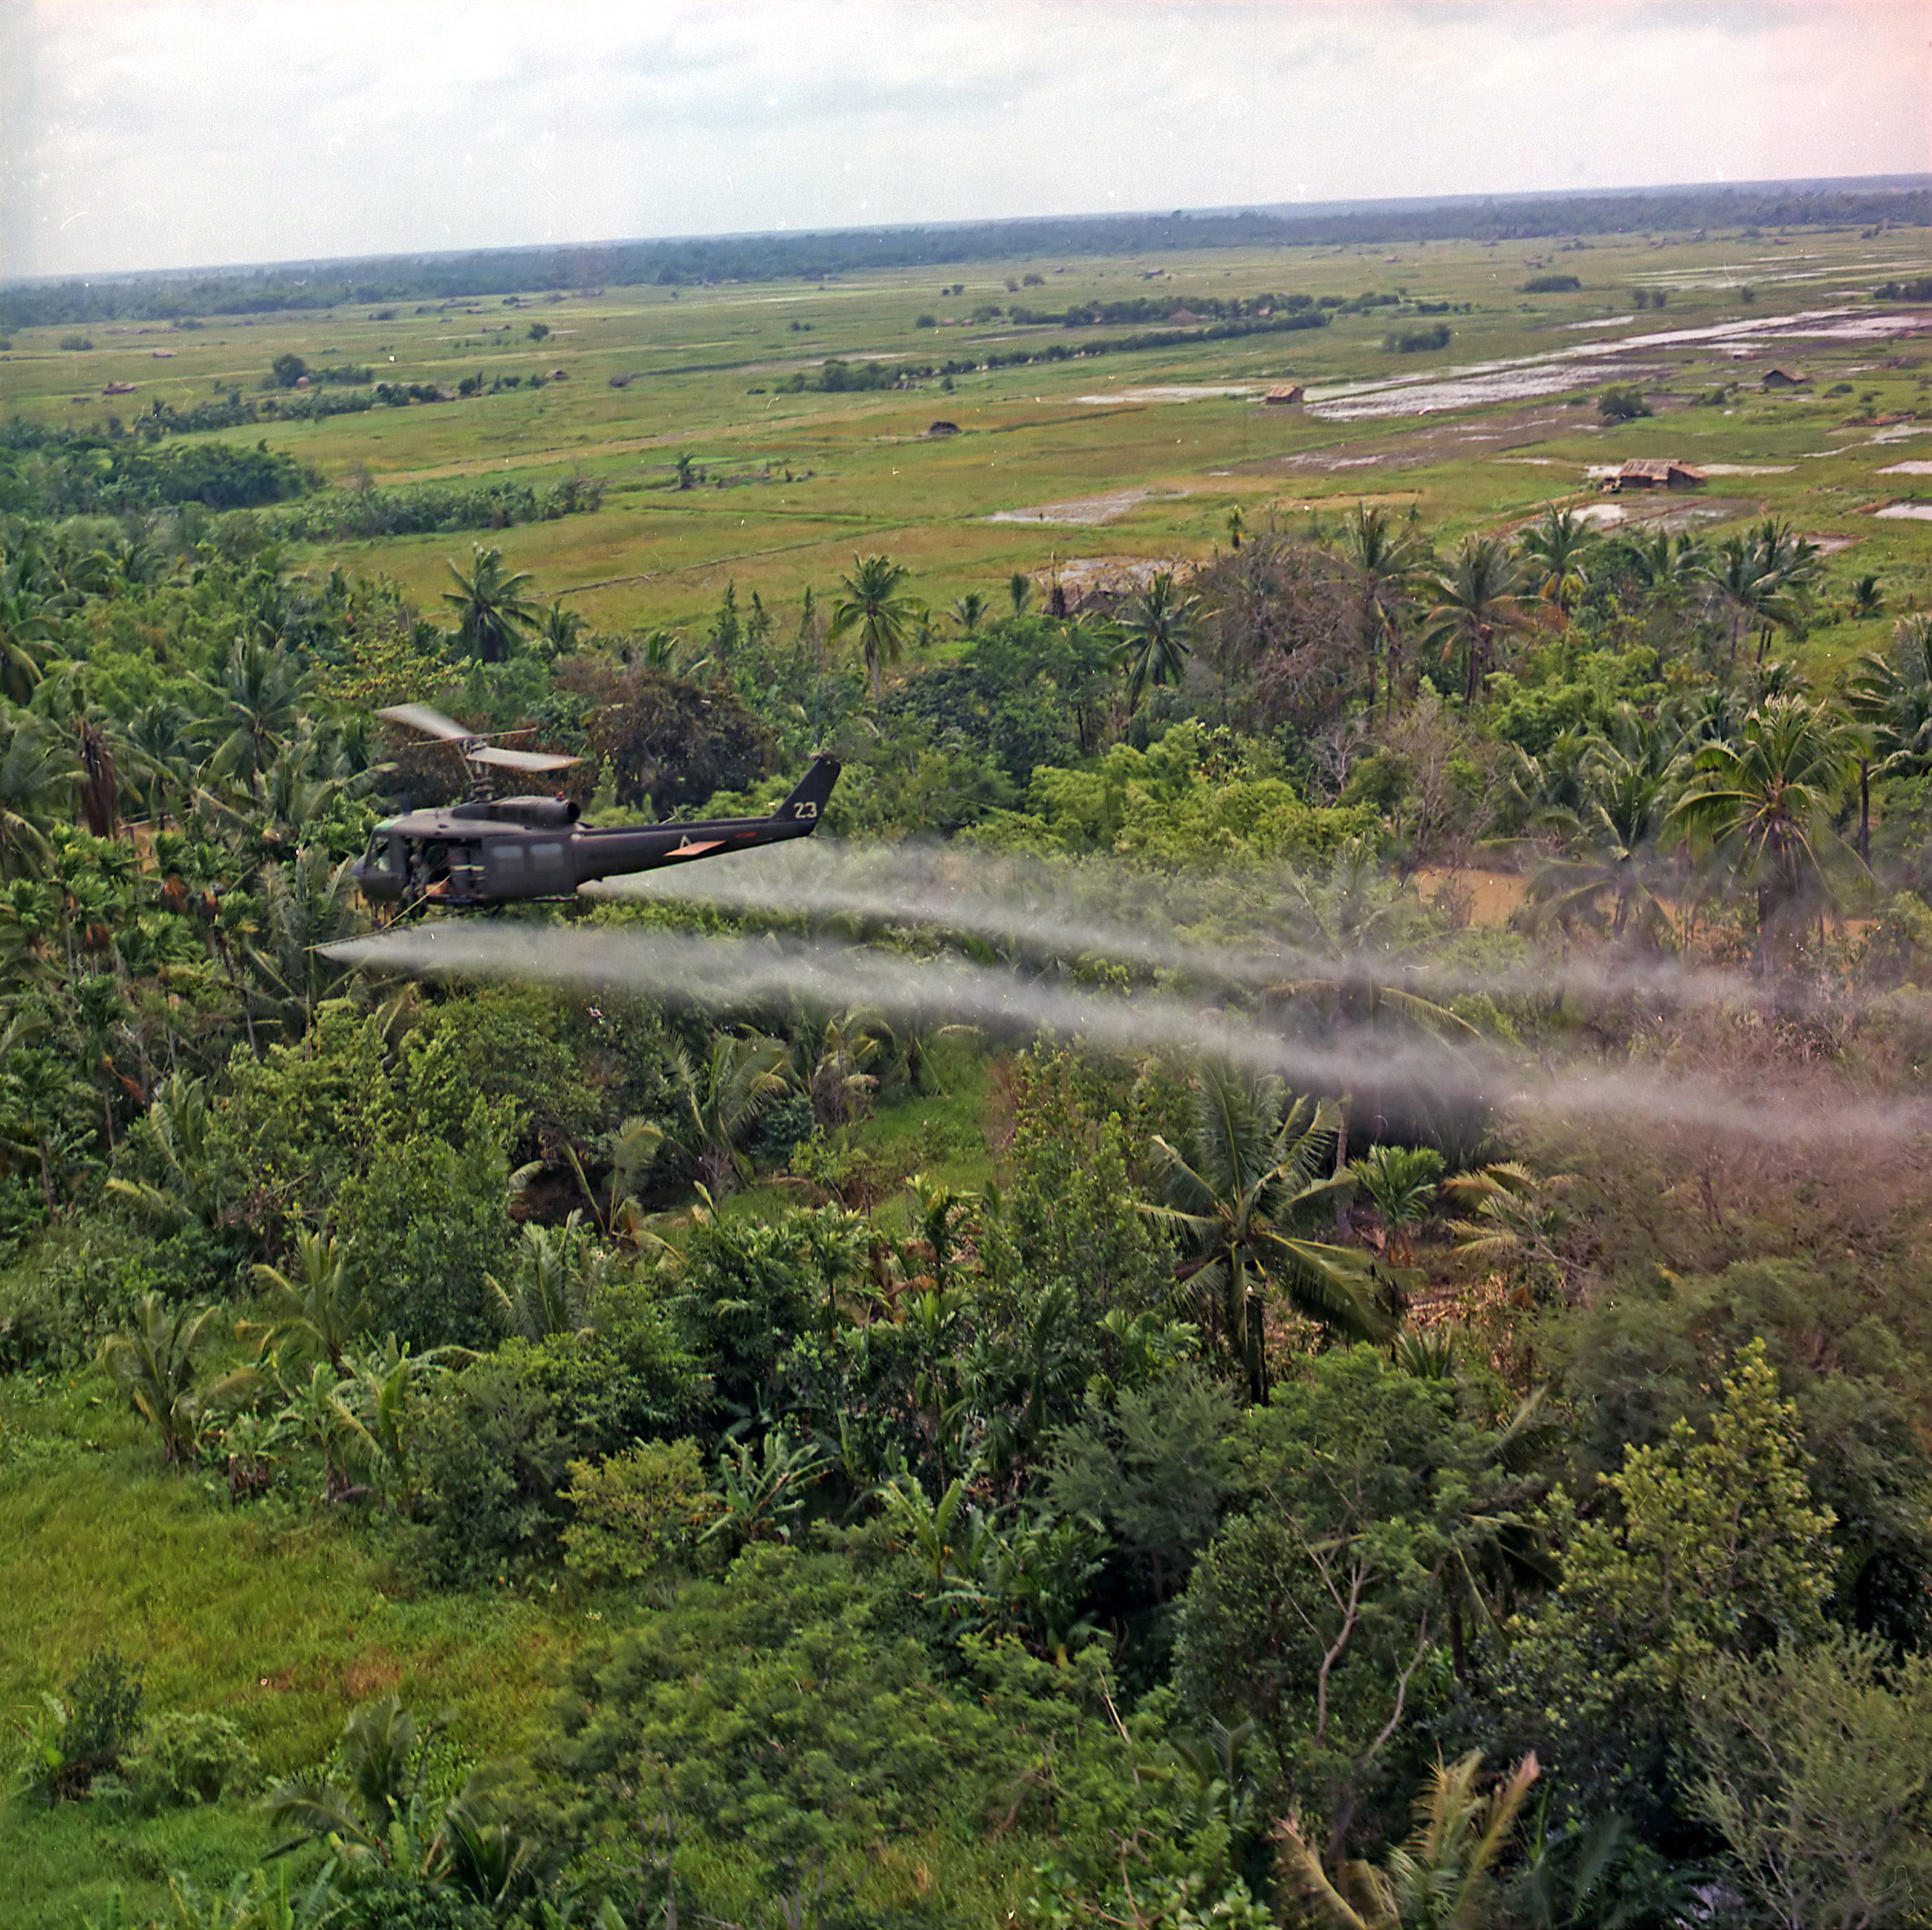 U.S. helicopter spraying chemical defoliants in the Mekong Delta during the Vietnam War